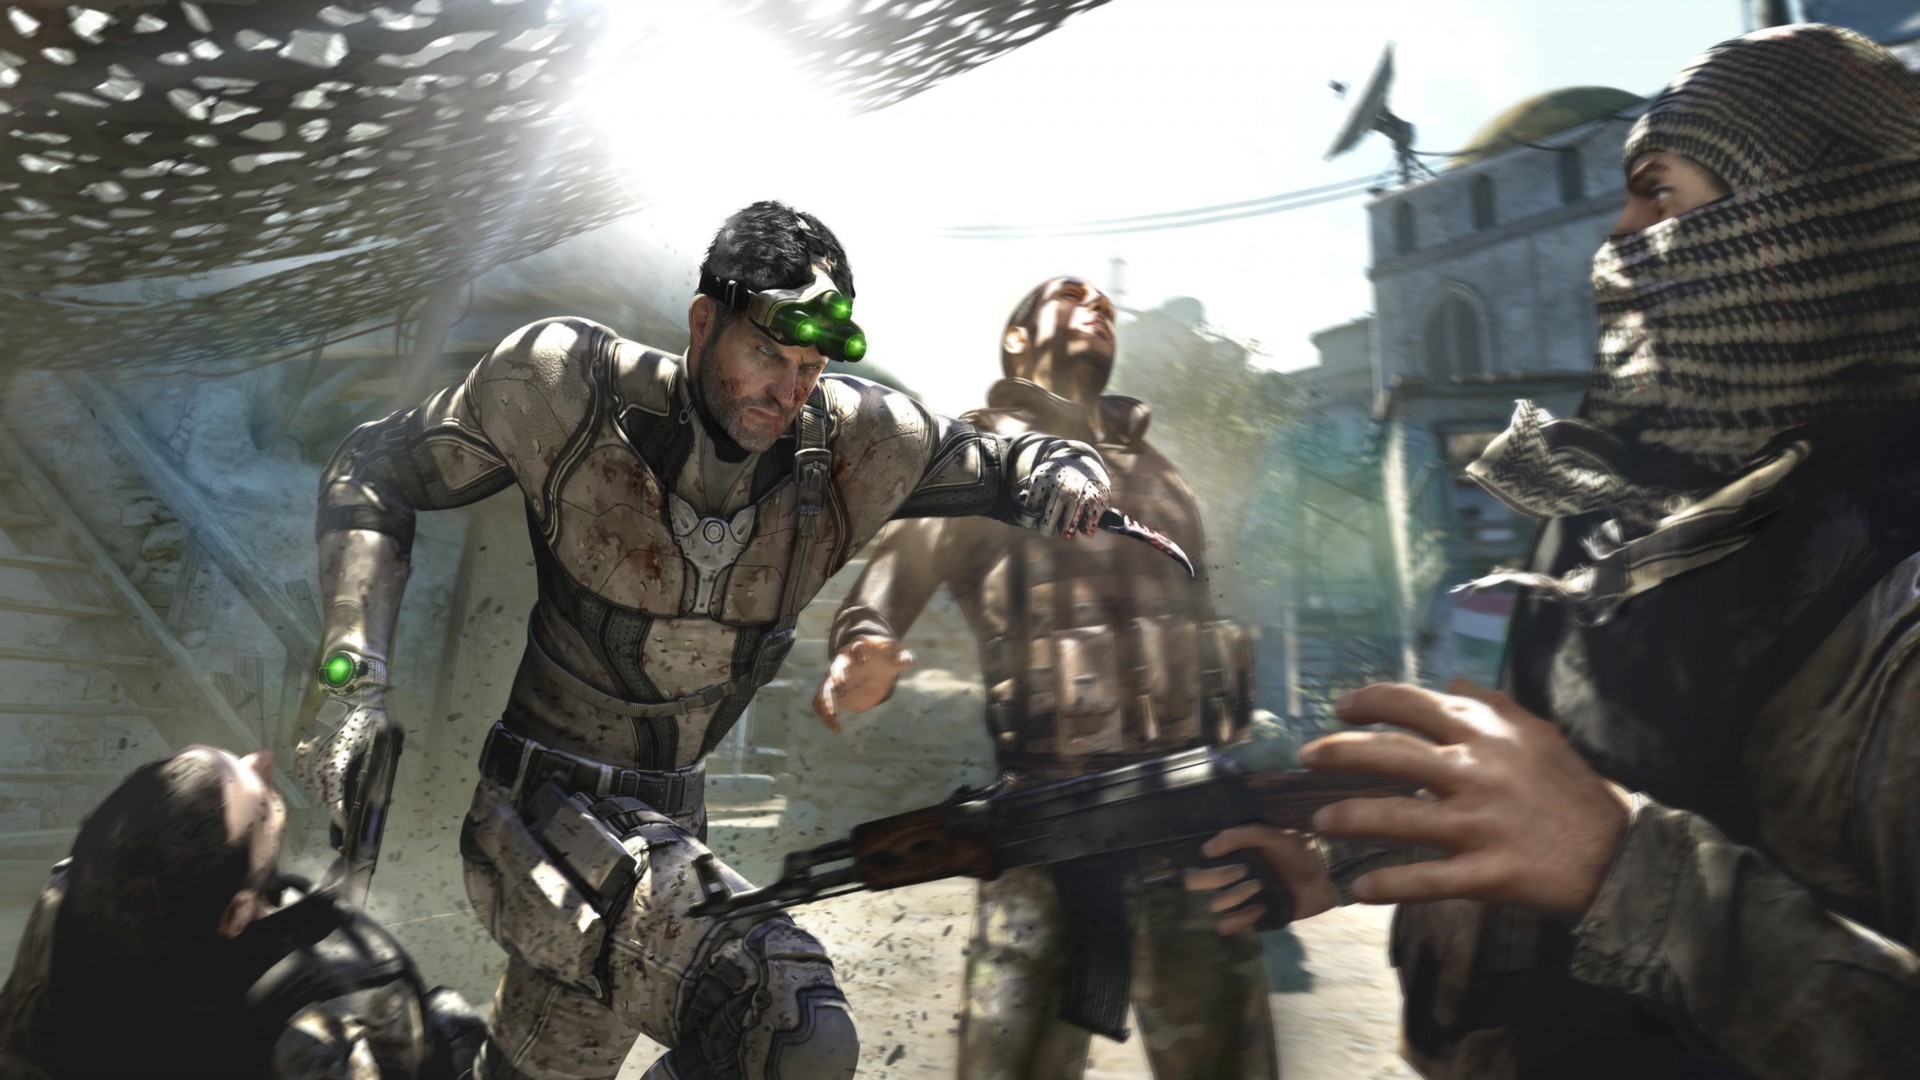 Splinter Cell Blacklist - The 5th Freedom Silver Edition Revealed pic 6